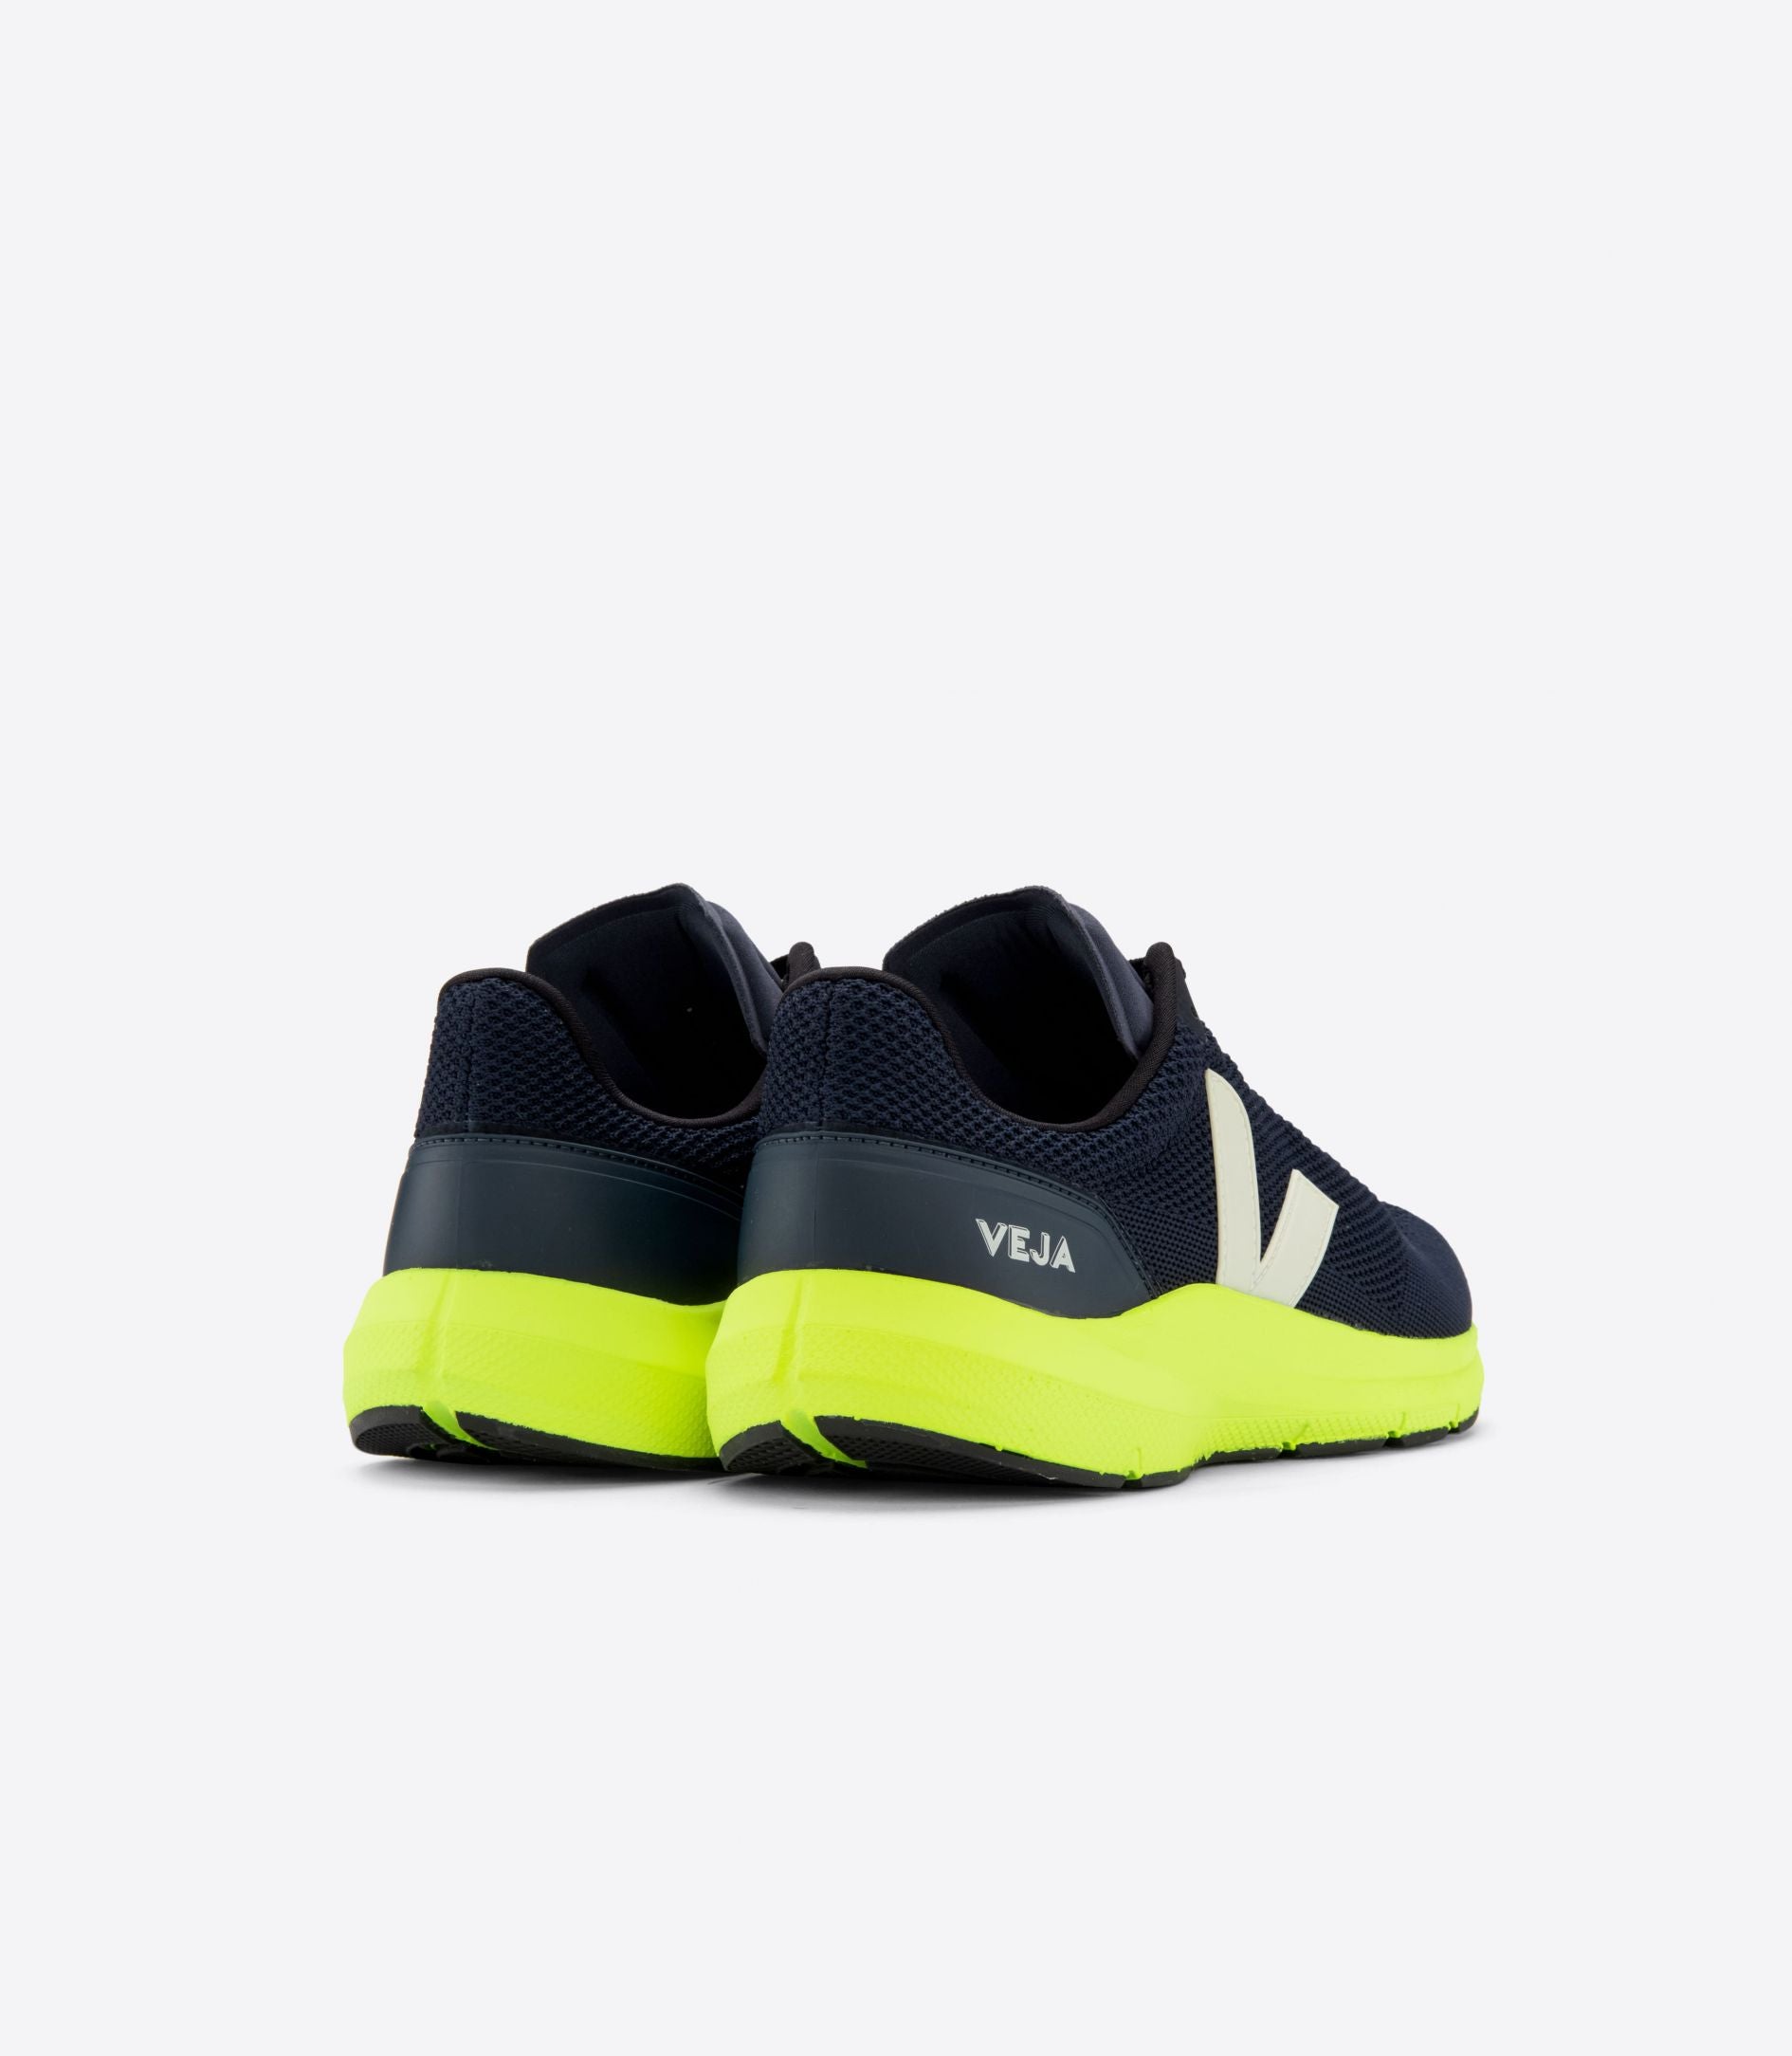 Back view of the Men's Marlin by VEJA in the color Atomo / Pierre